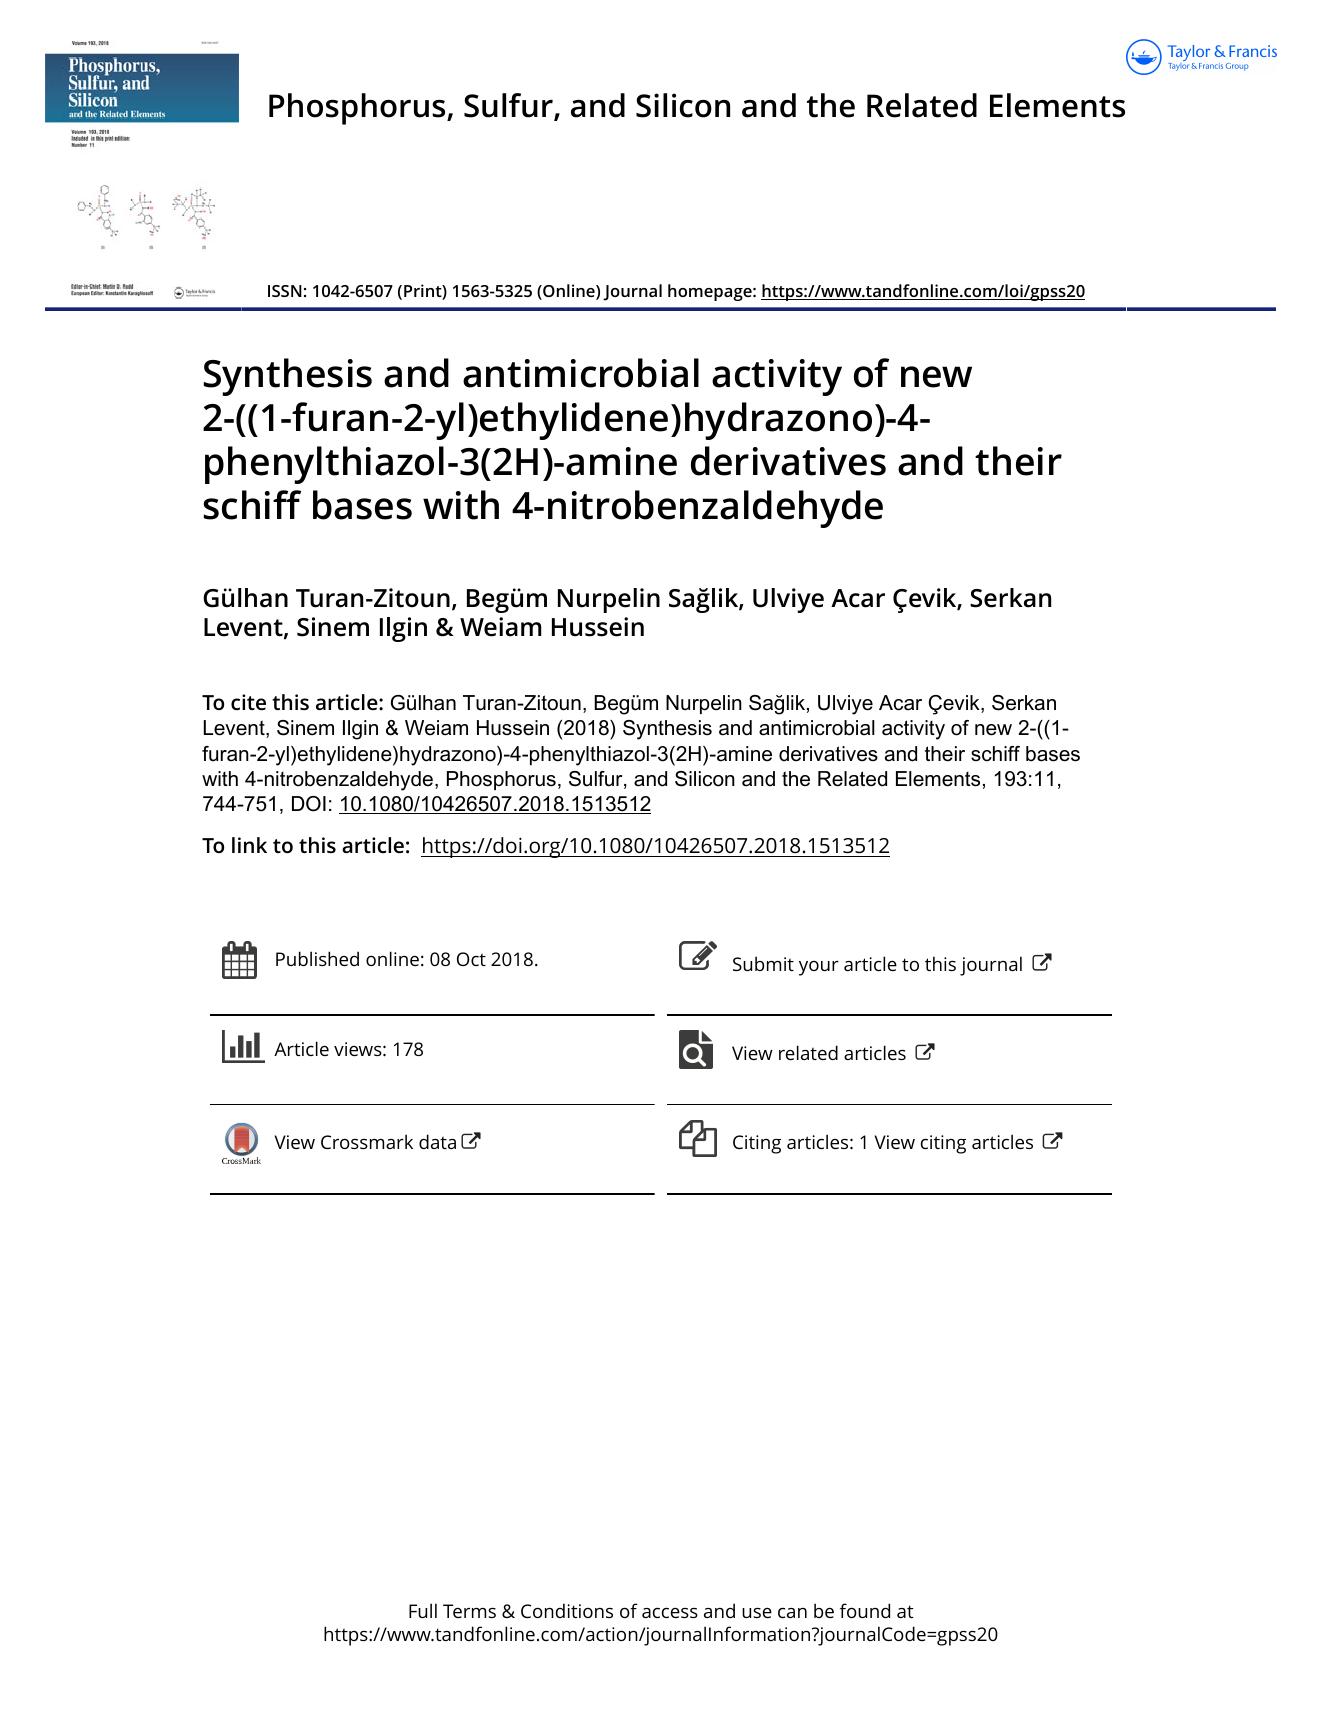 Synthesis and antimicrobial activity of new 2-((1-furan-2-yl)ethylidene)hydrazono)-4-phenylthiazol-3(2H)-amine derivatives and their schiff bases with 4-nitrobenzaldehyde by unknow